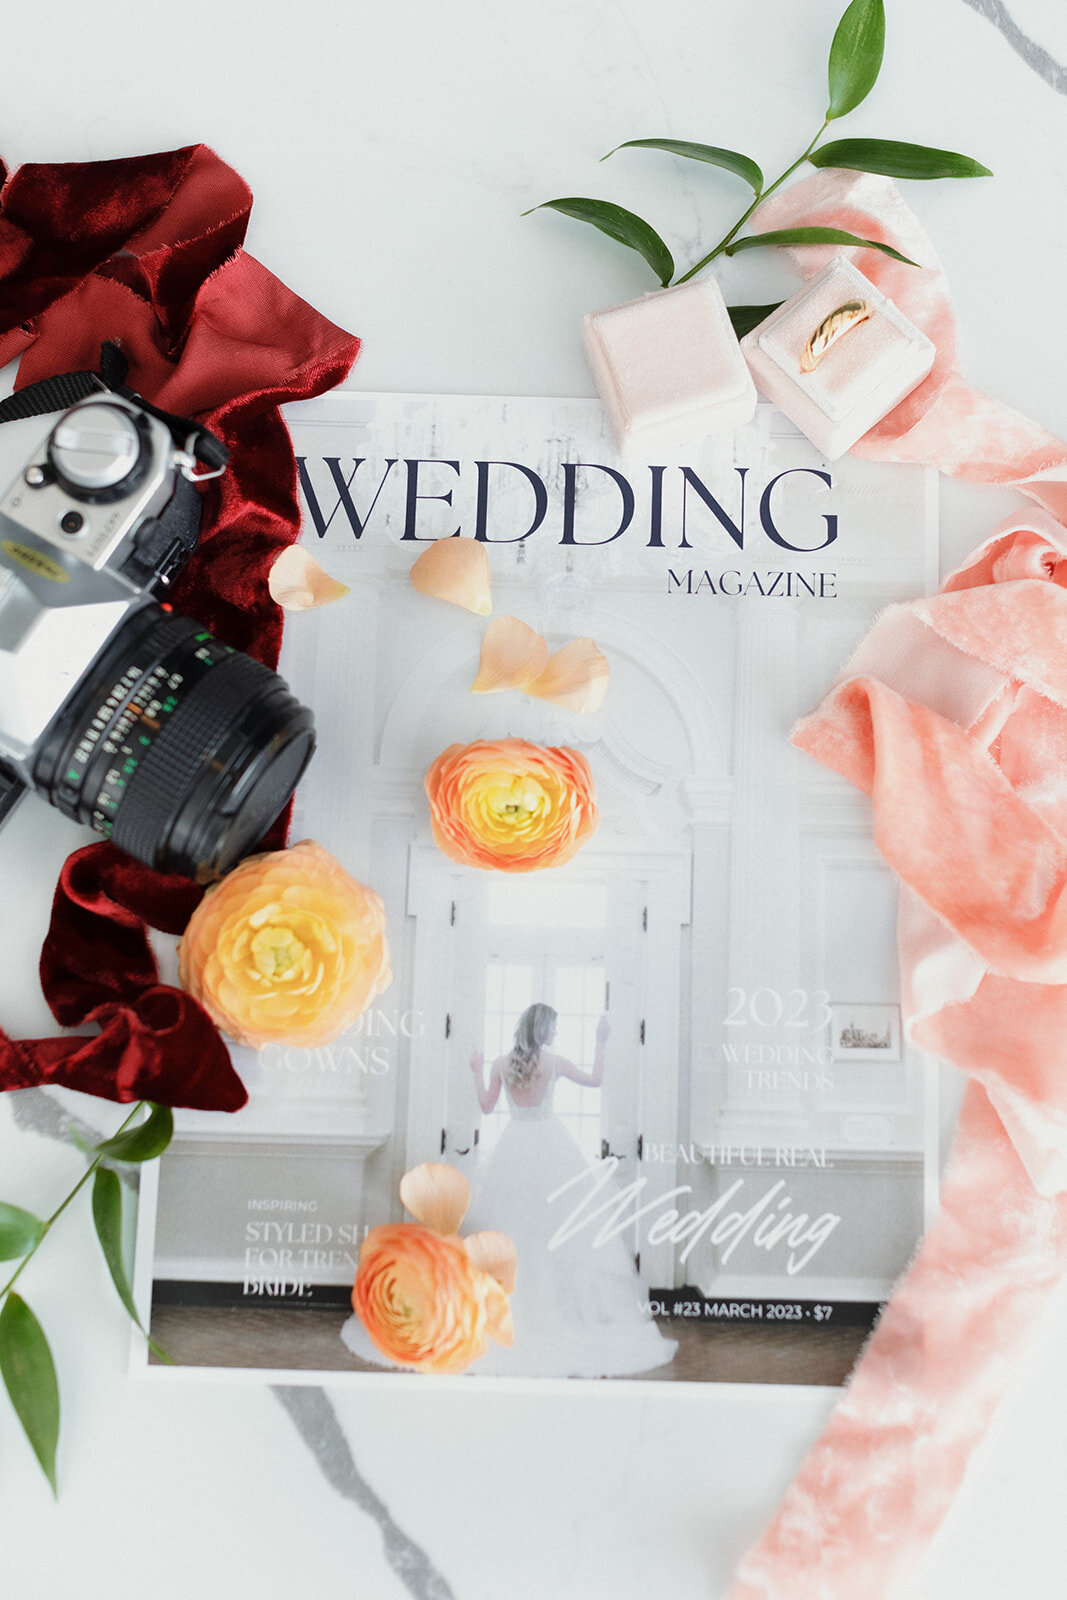 detail photo of wedding magazine, flowers and old camera